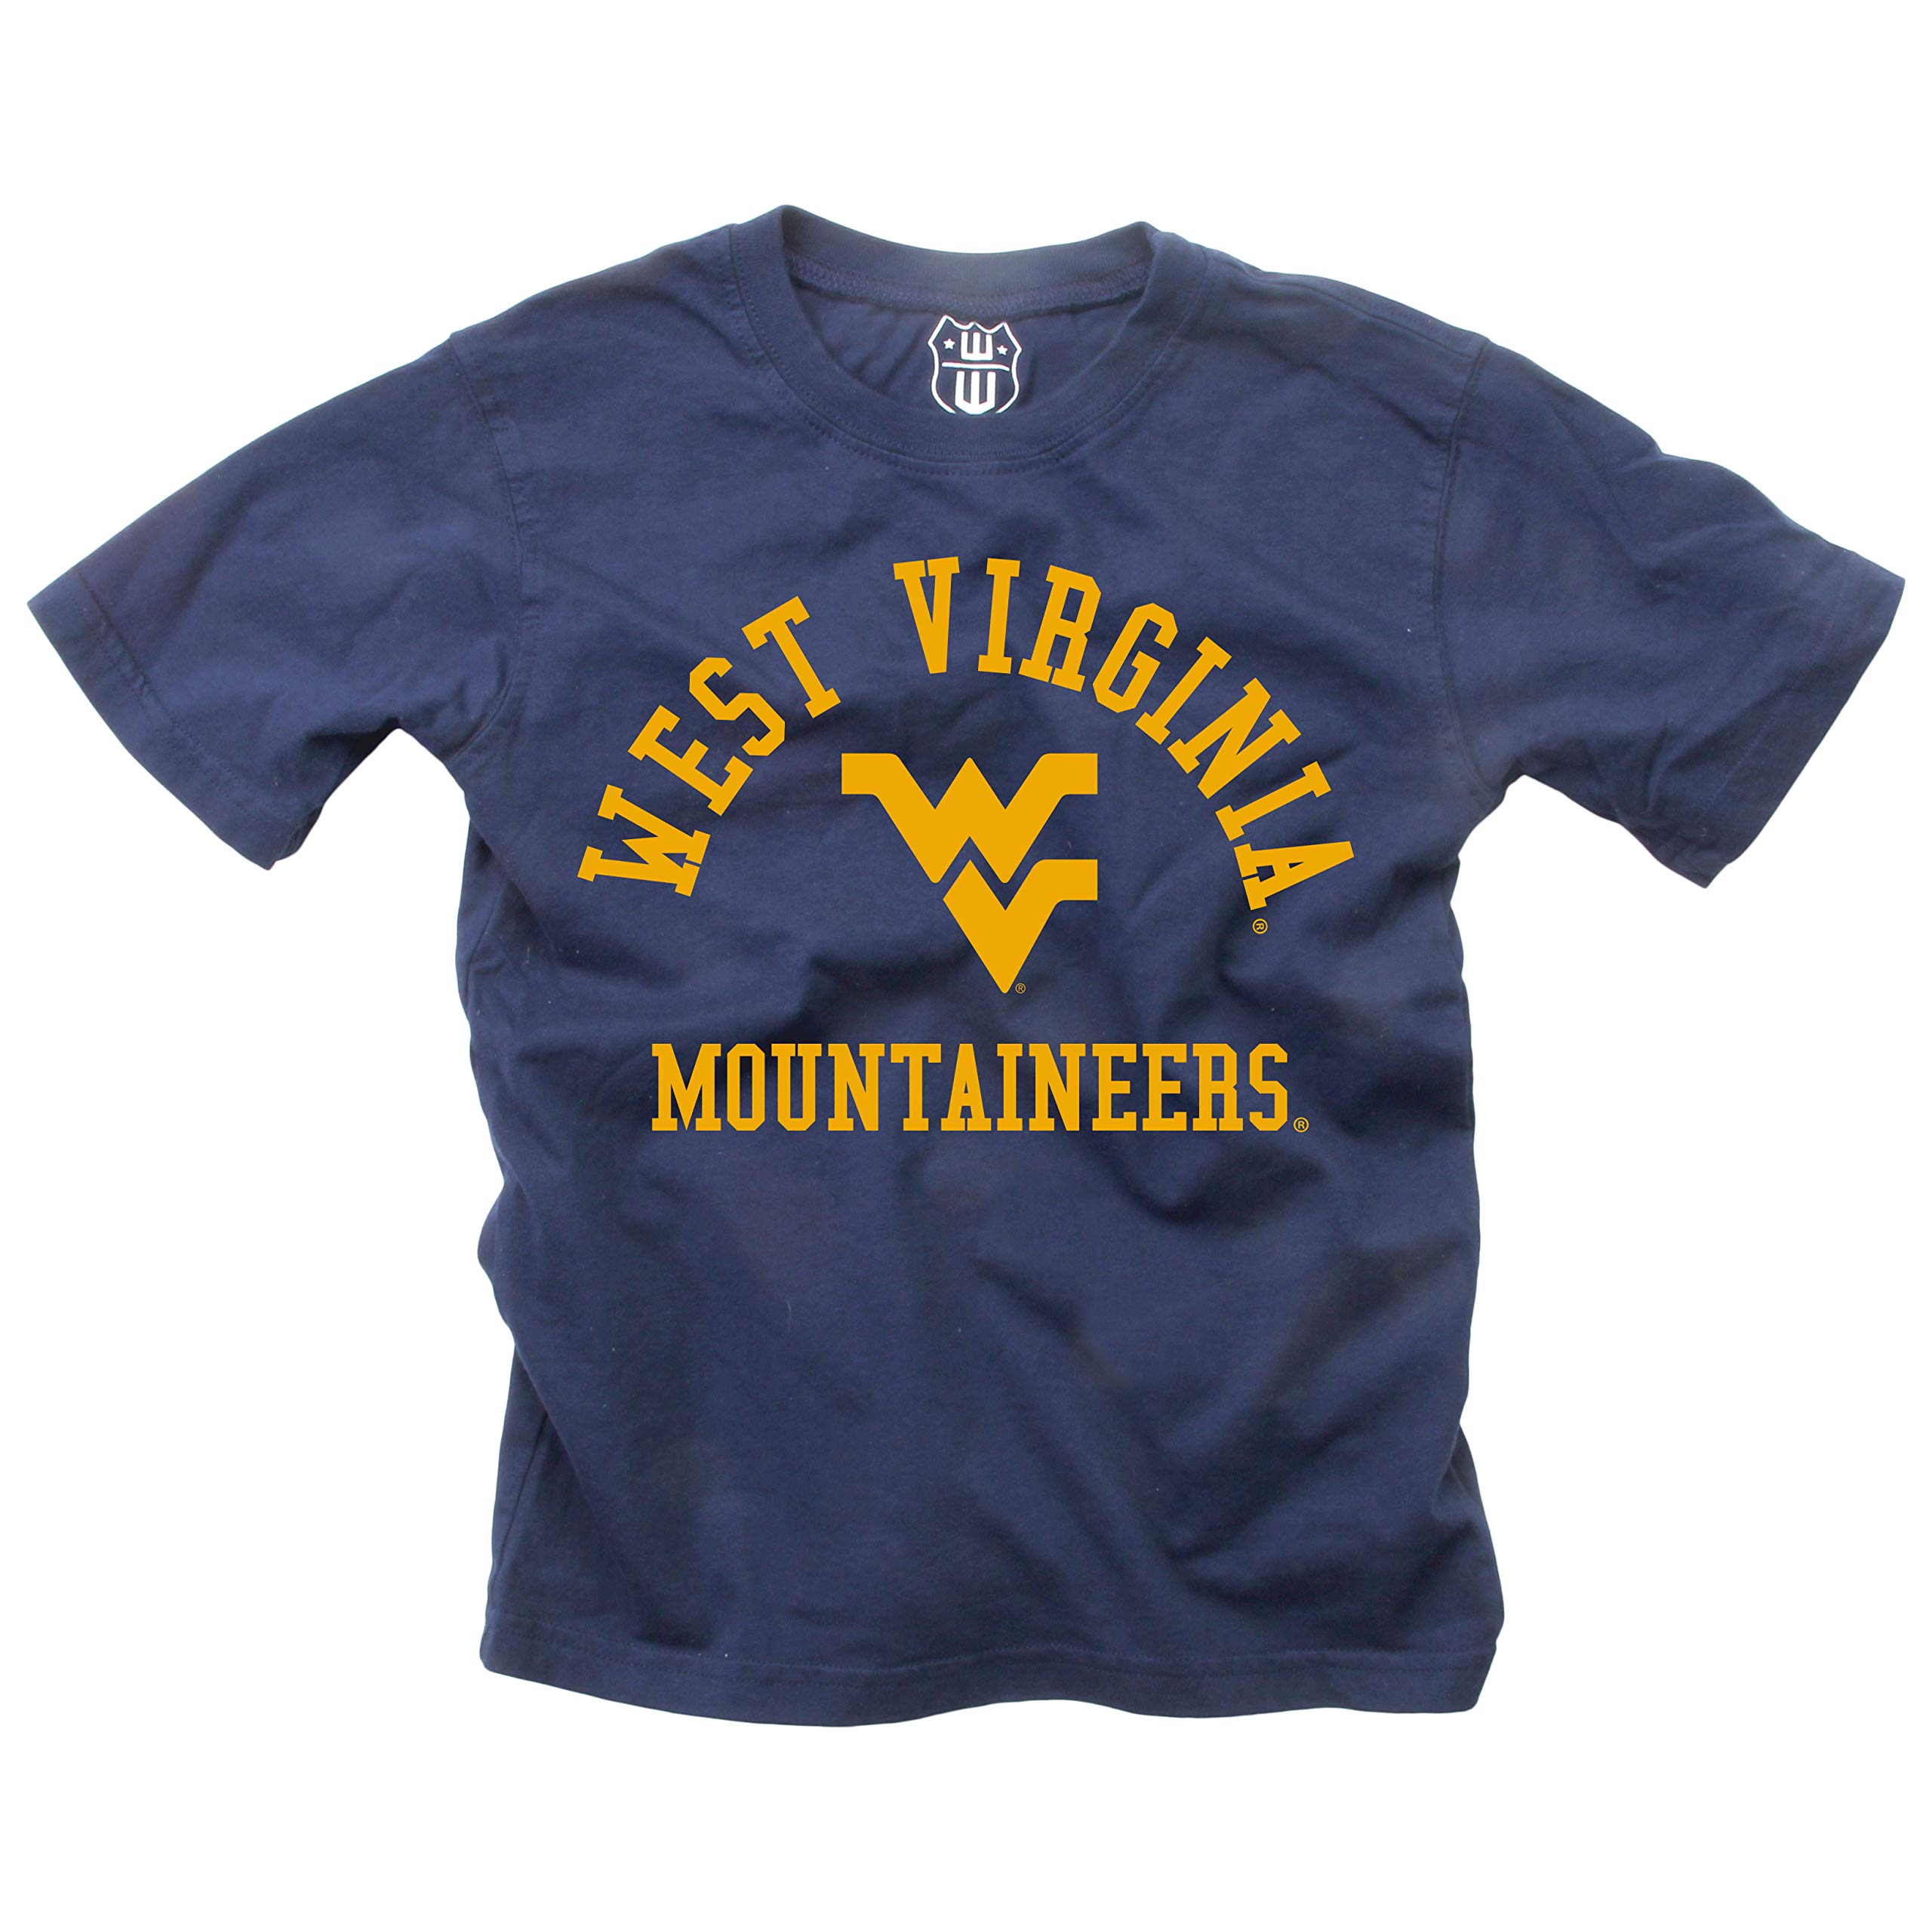 Wes and Willy NcAA Kids SS Organic cotton Tee Shirt, West Virginia Mountaineers, Midnight, 4